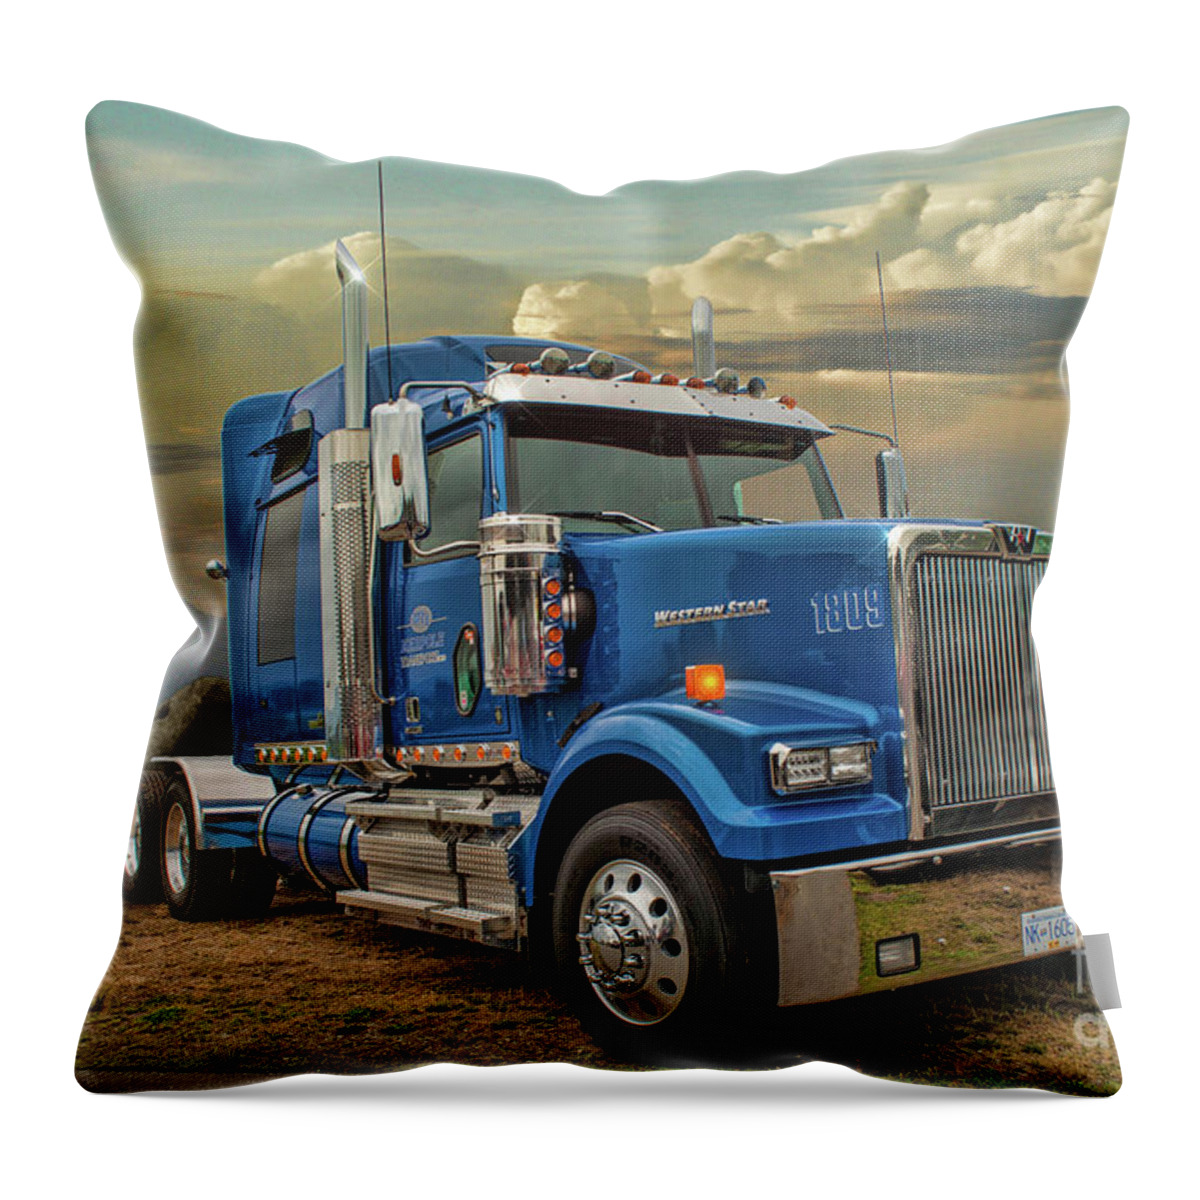 Big Rigs Throw Pillow featuring the photograph Catr9309-19 by Randy Harris